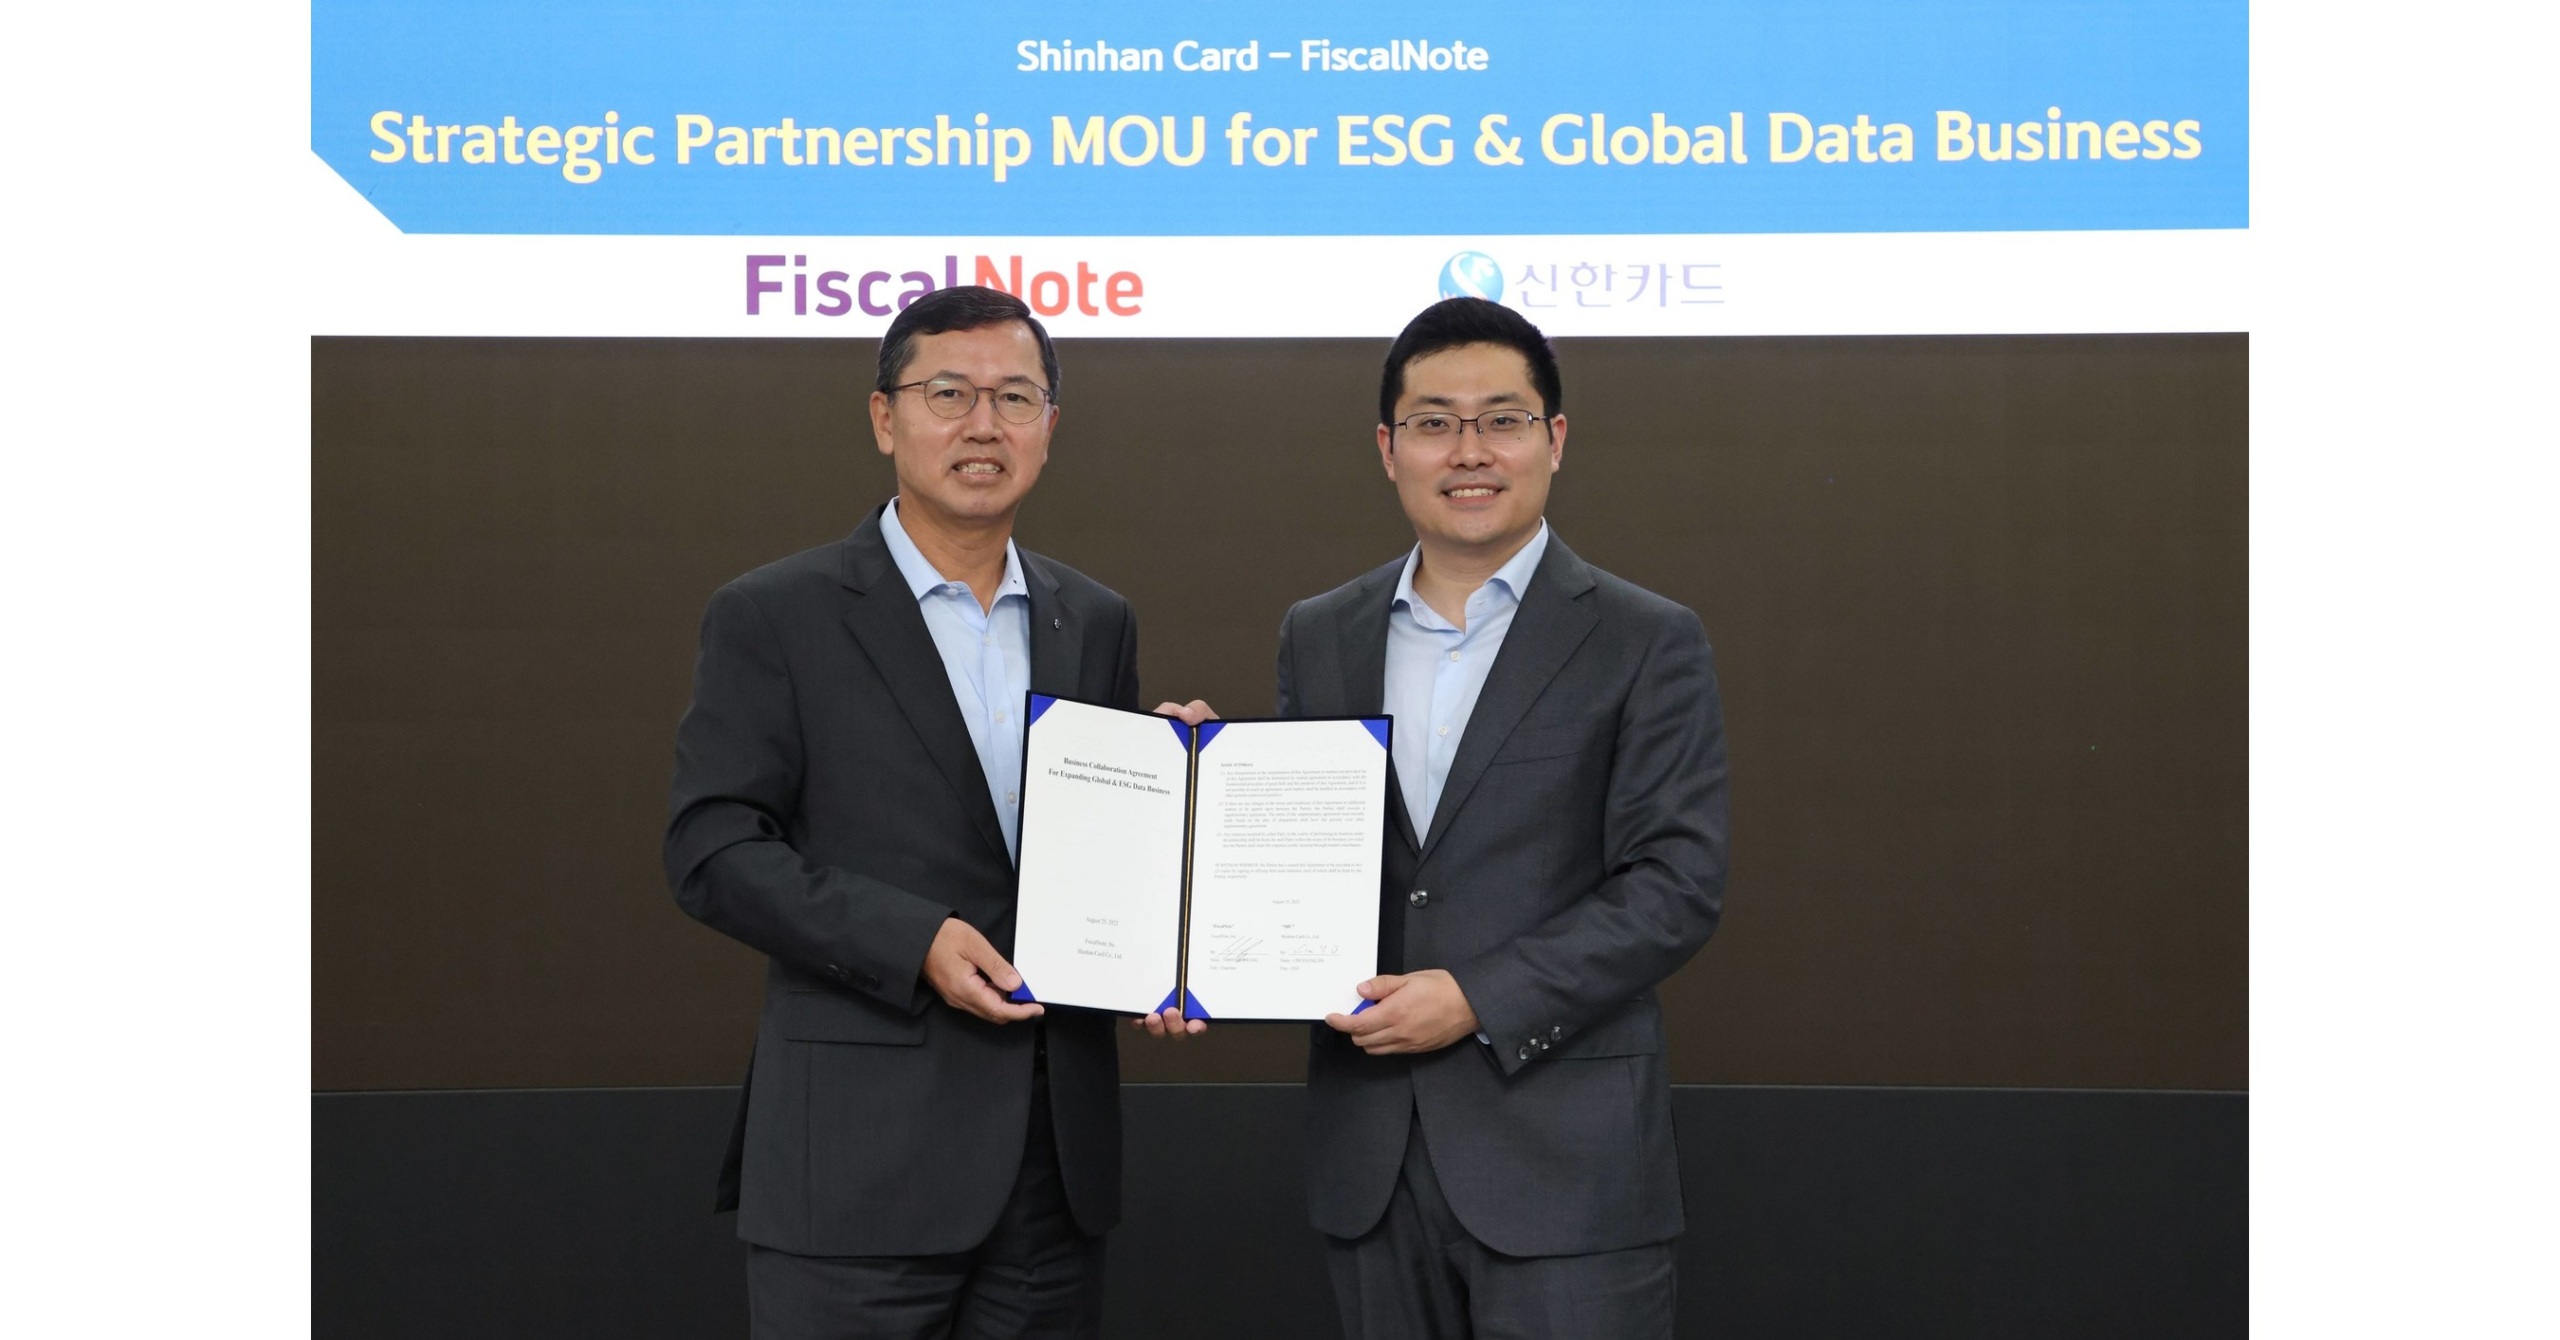 FISCALNOTE ANNOUNCES STRATEGIC PARTNERSHIP WITH SOUTH KOREA CONSUMER FINANCE LEADER SHINHAN CARD – PR Newswire